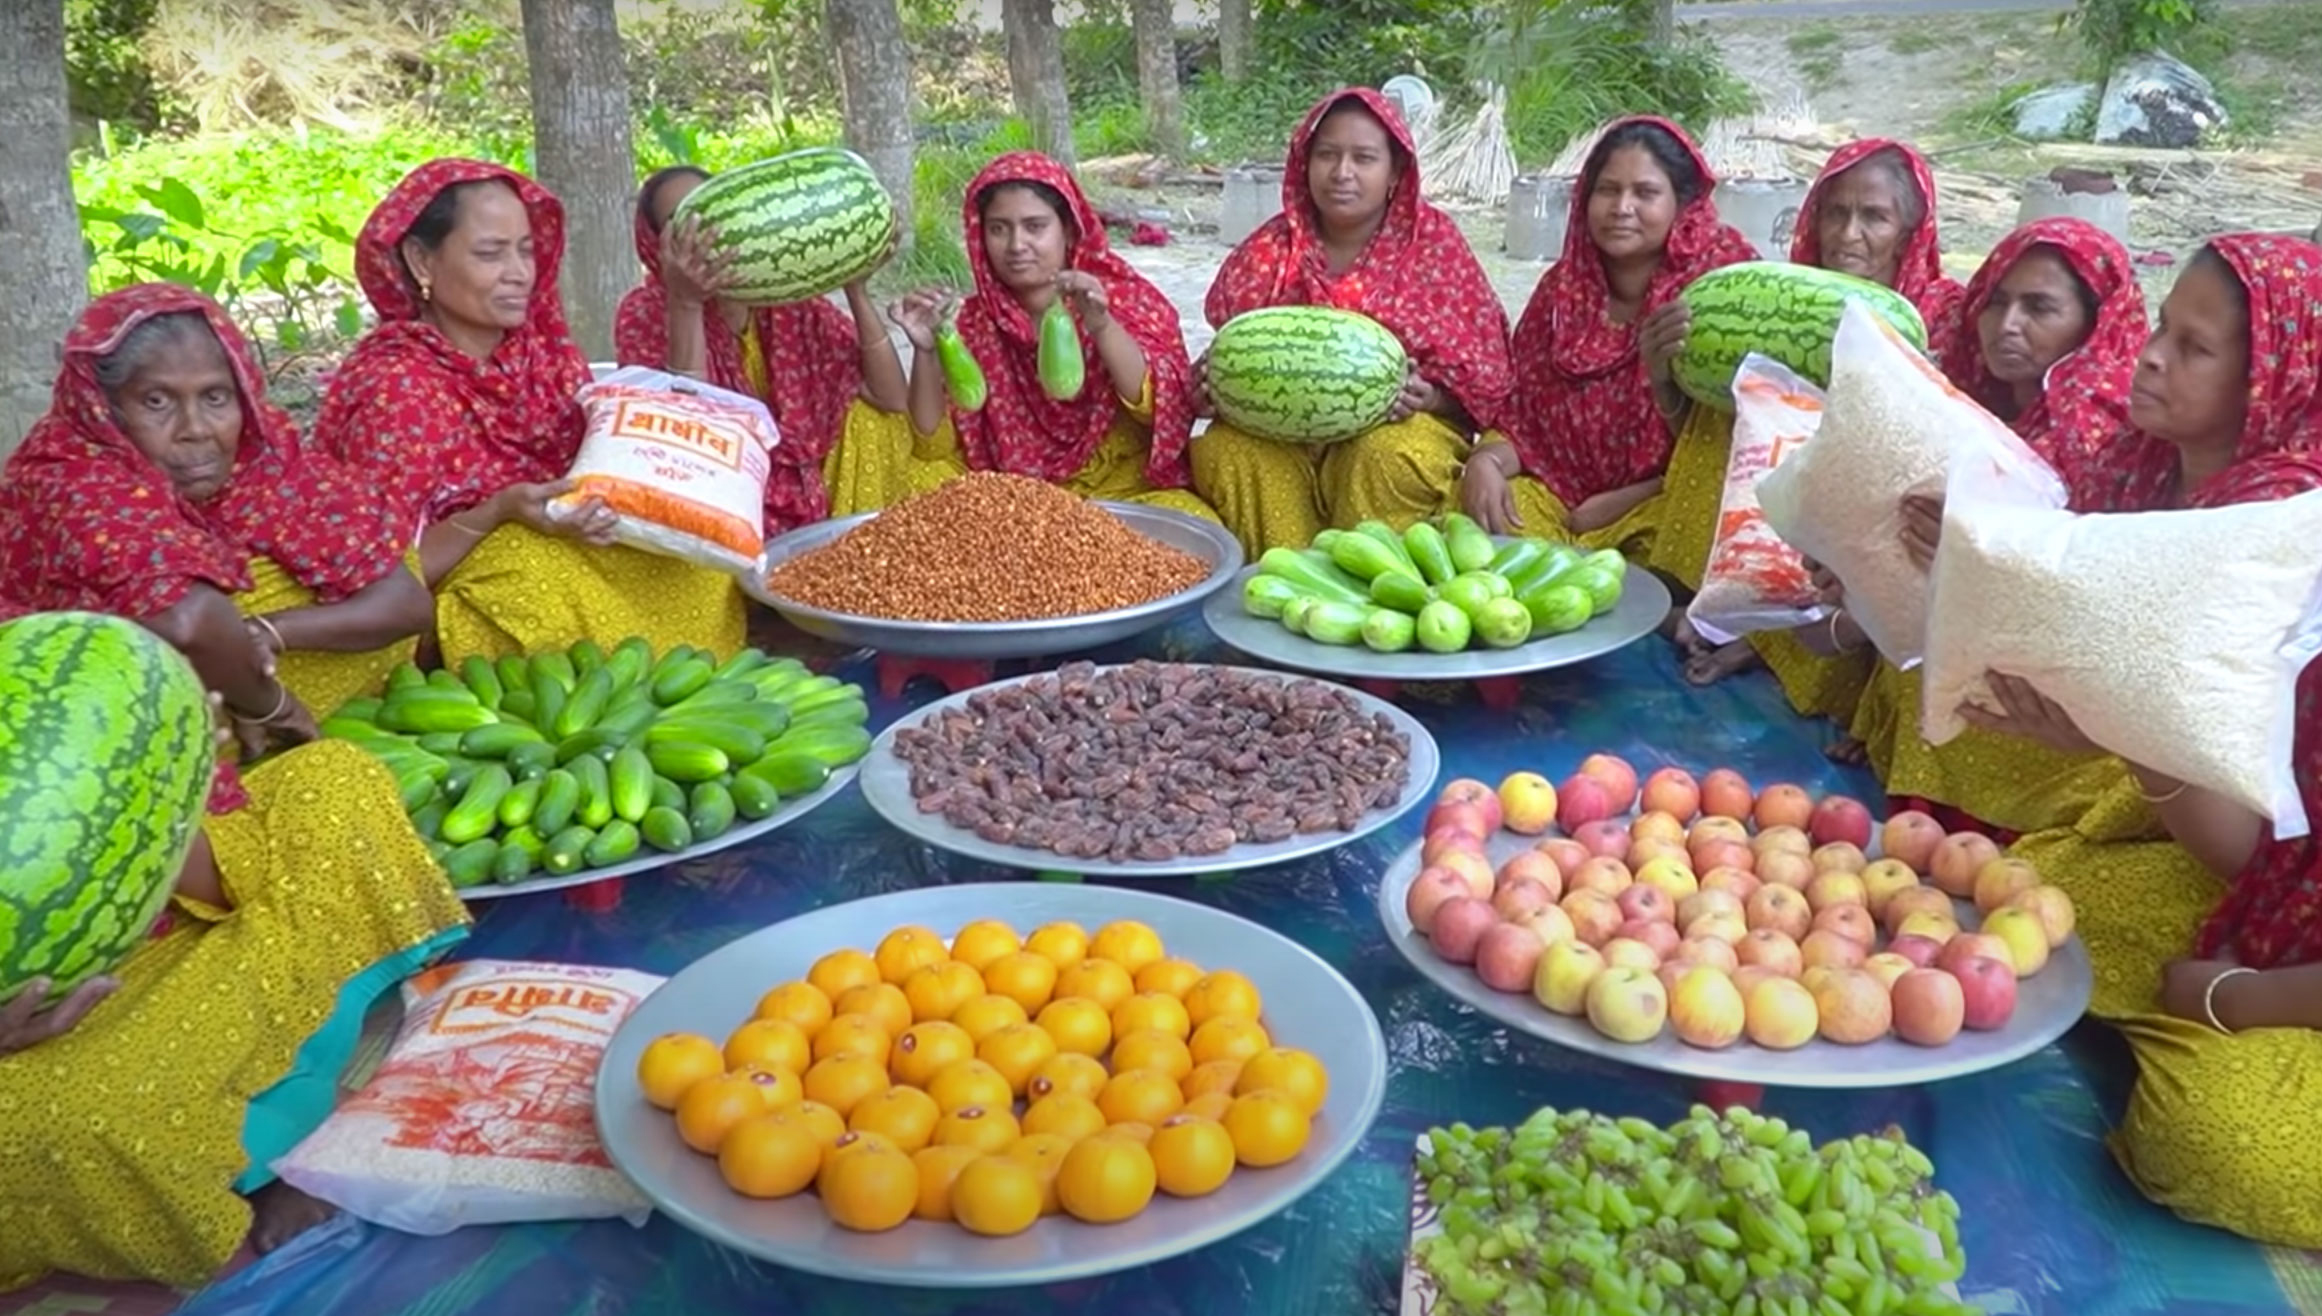 Fruits and spices prepared by 15 women of the village during Ramadan. Image: AroundMeBD